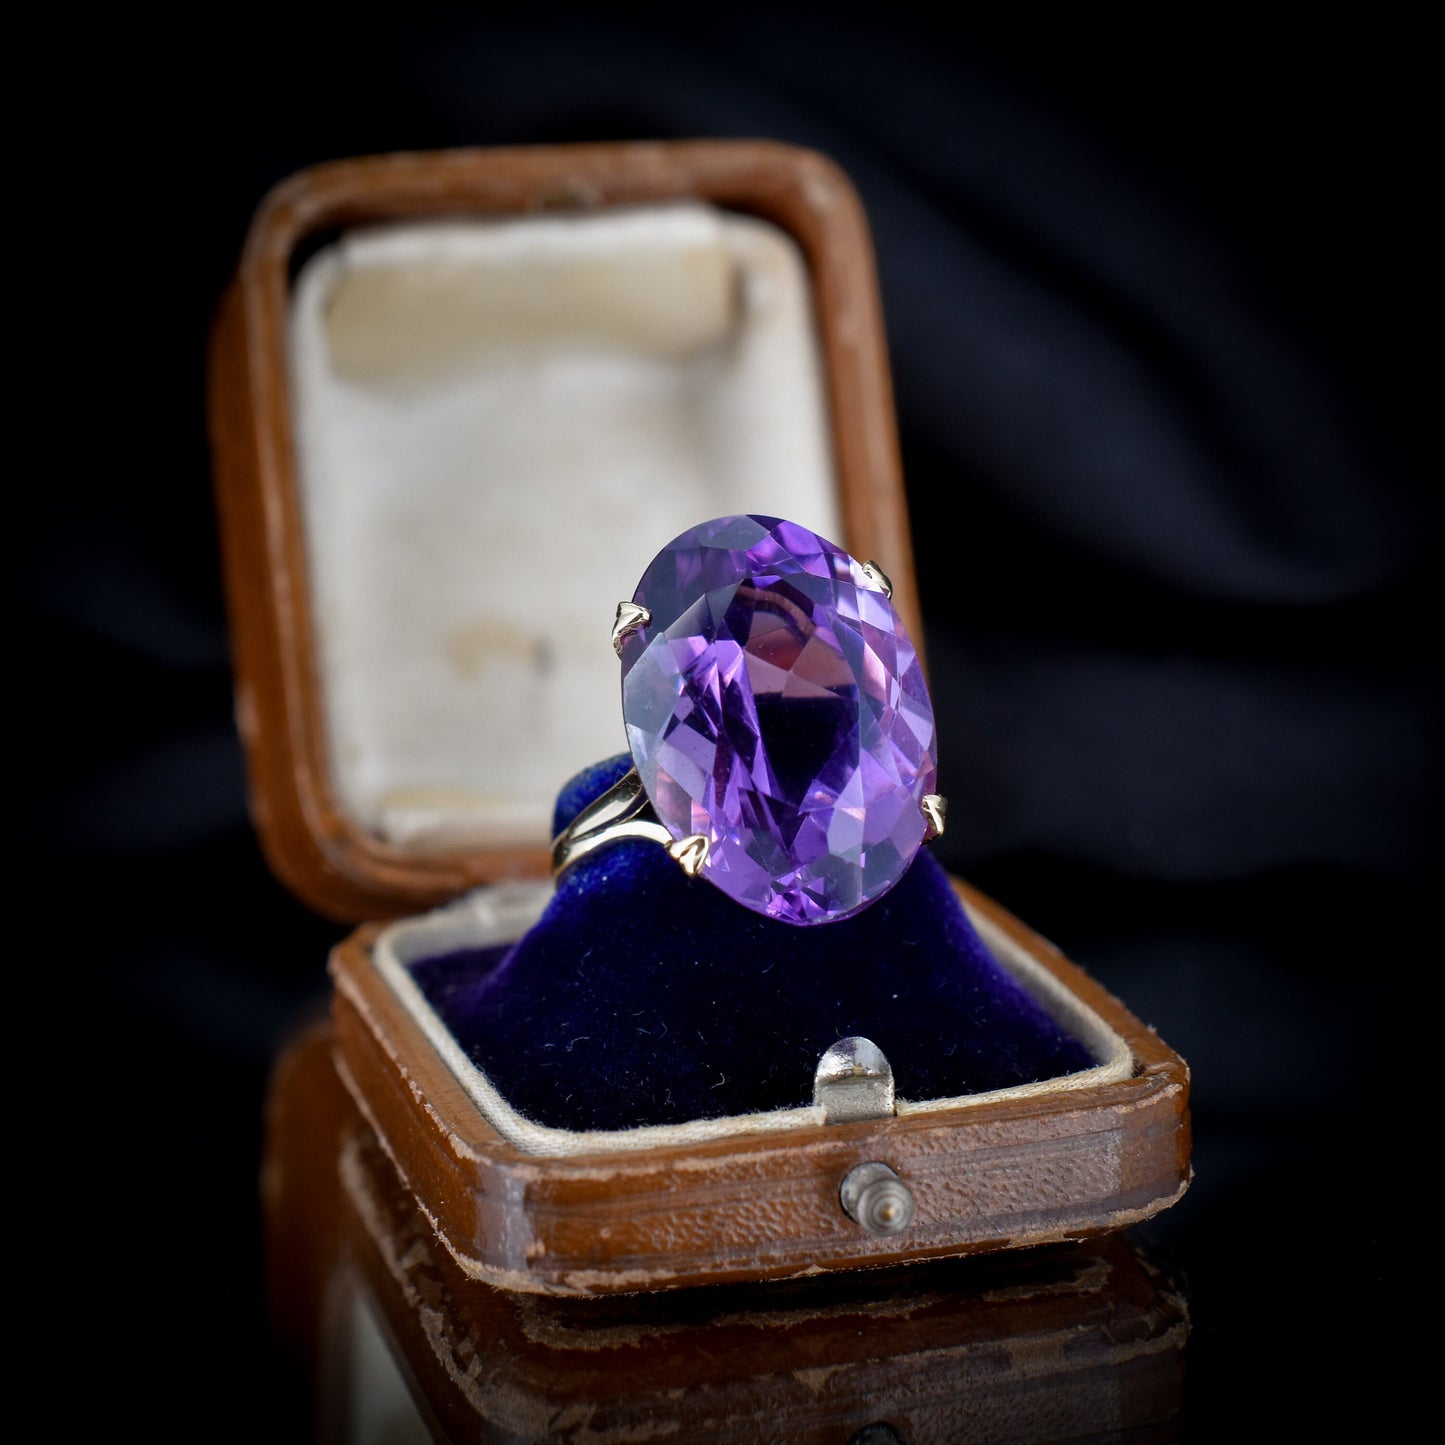 Vintage Oval Cut Large Amethyst Solitaire Gold Cocktail Ring